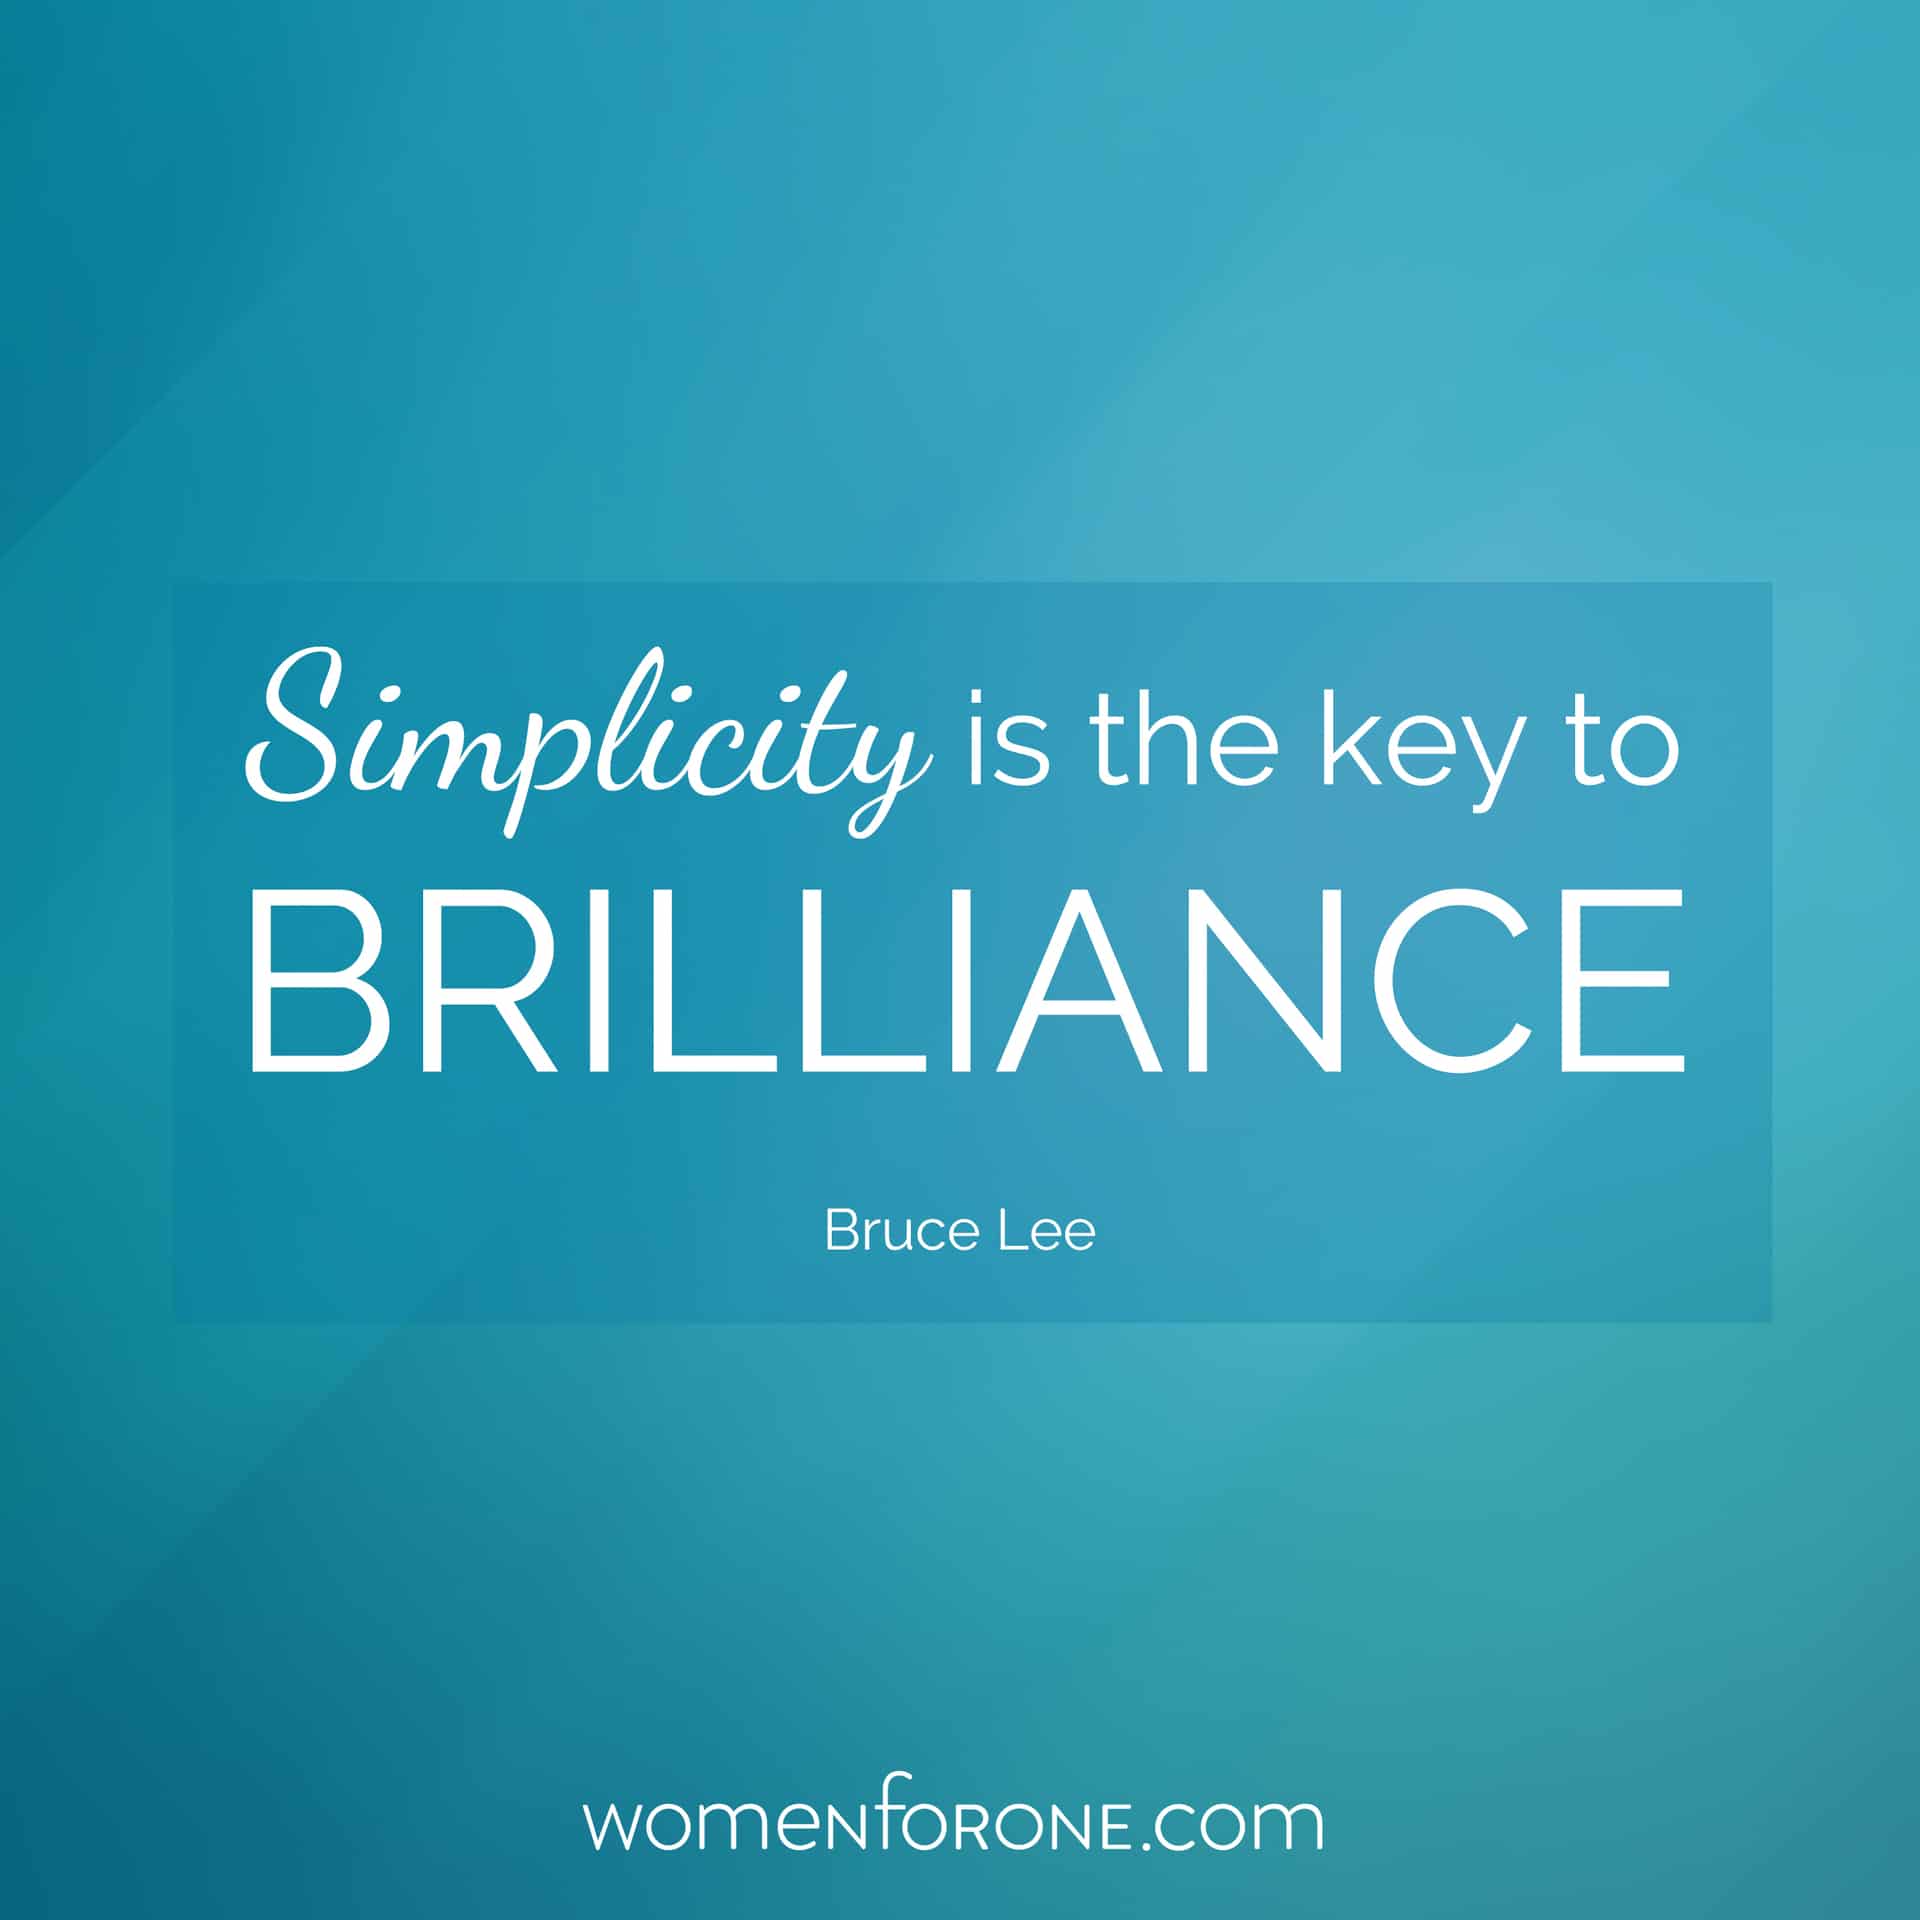 Simplicity is the key to brilliance. - Bruce Lee